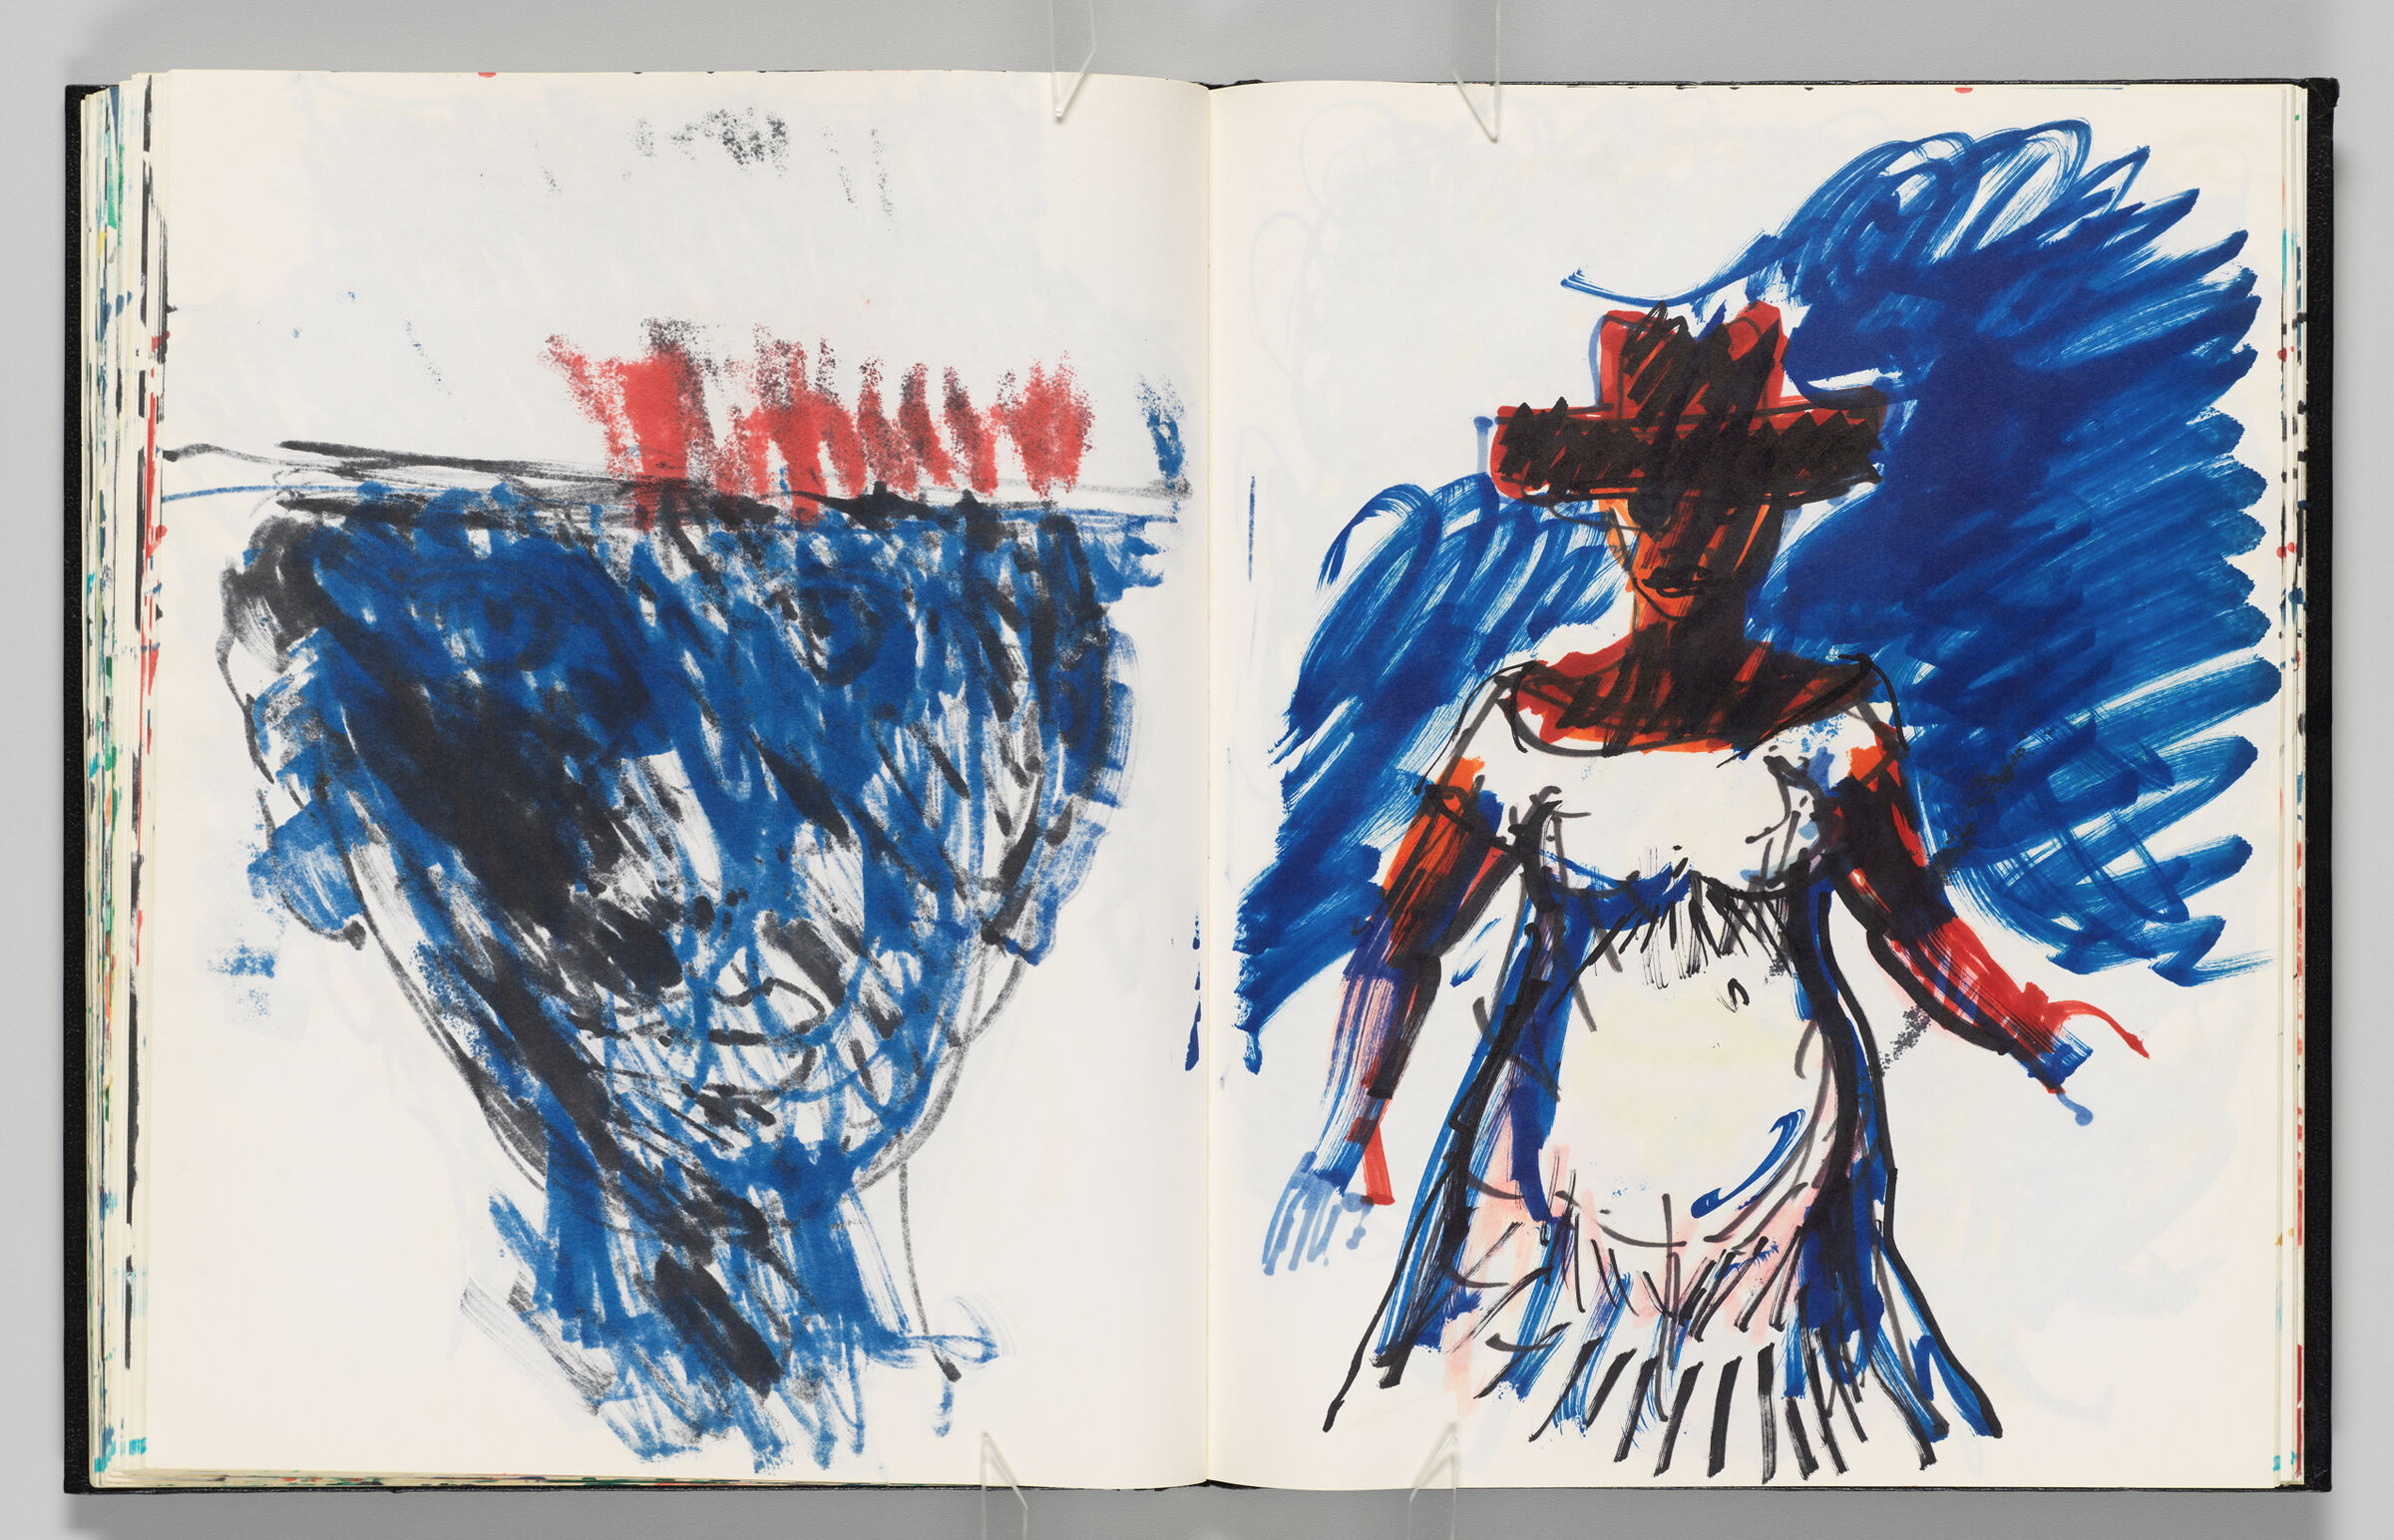 Untitled (Bleed-Through Of Previous Page, Left Page); Untitled (Three-Quarter Length Sketch Of Woman In Tobago, Right Page)